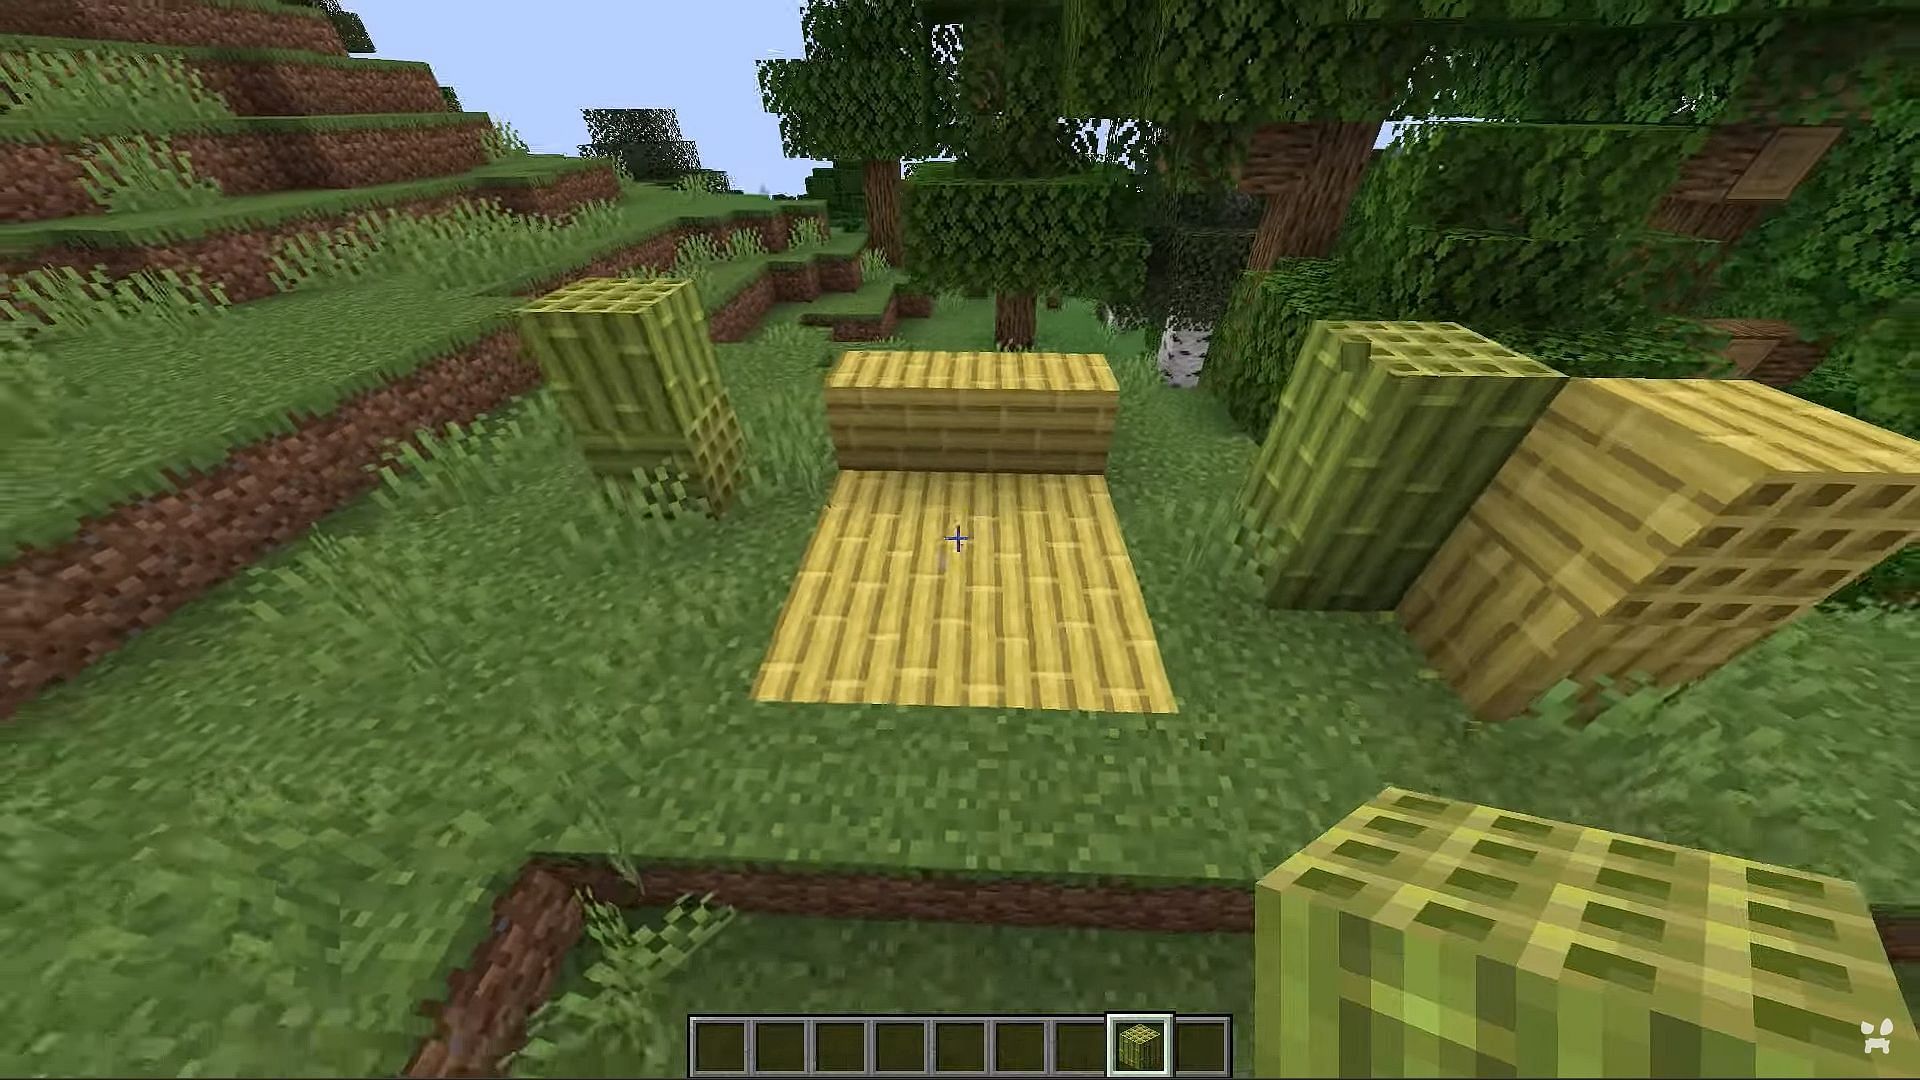 Bamboo textures have been slightly changed in the snapshot (Image via YouTube/wattles)